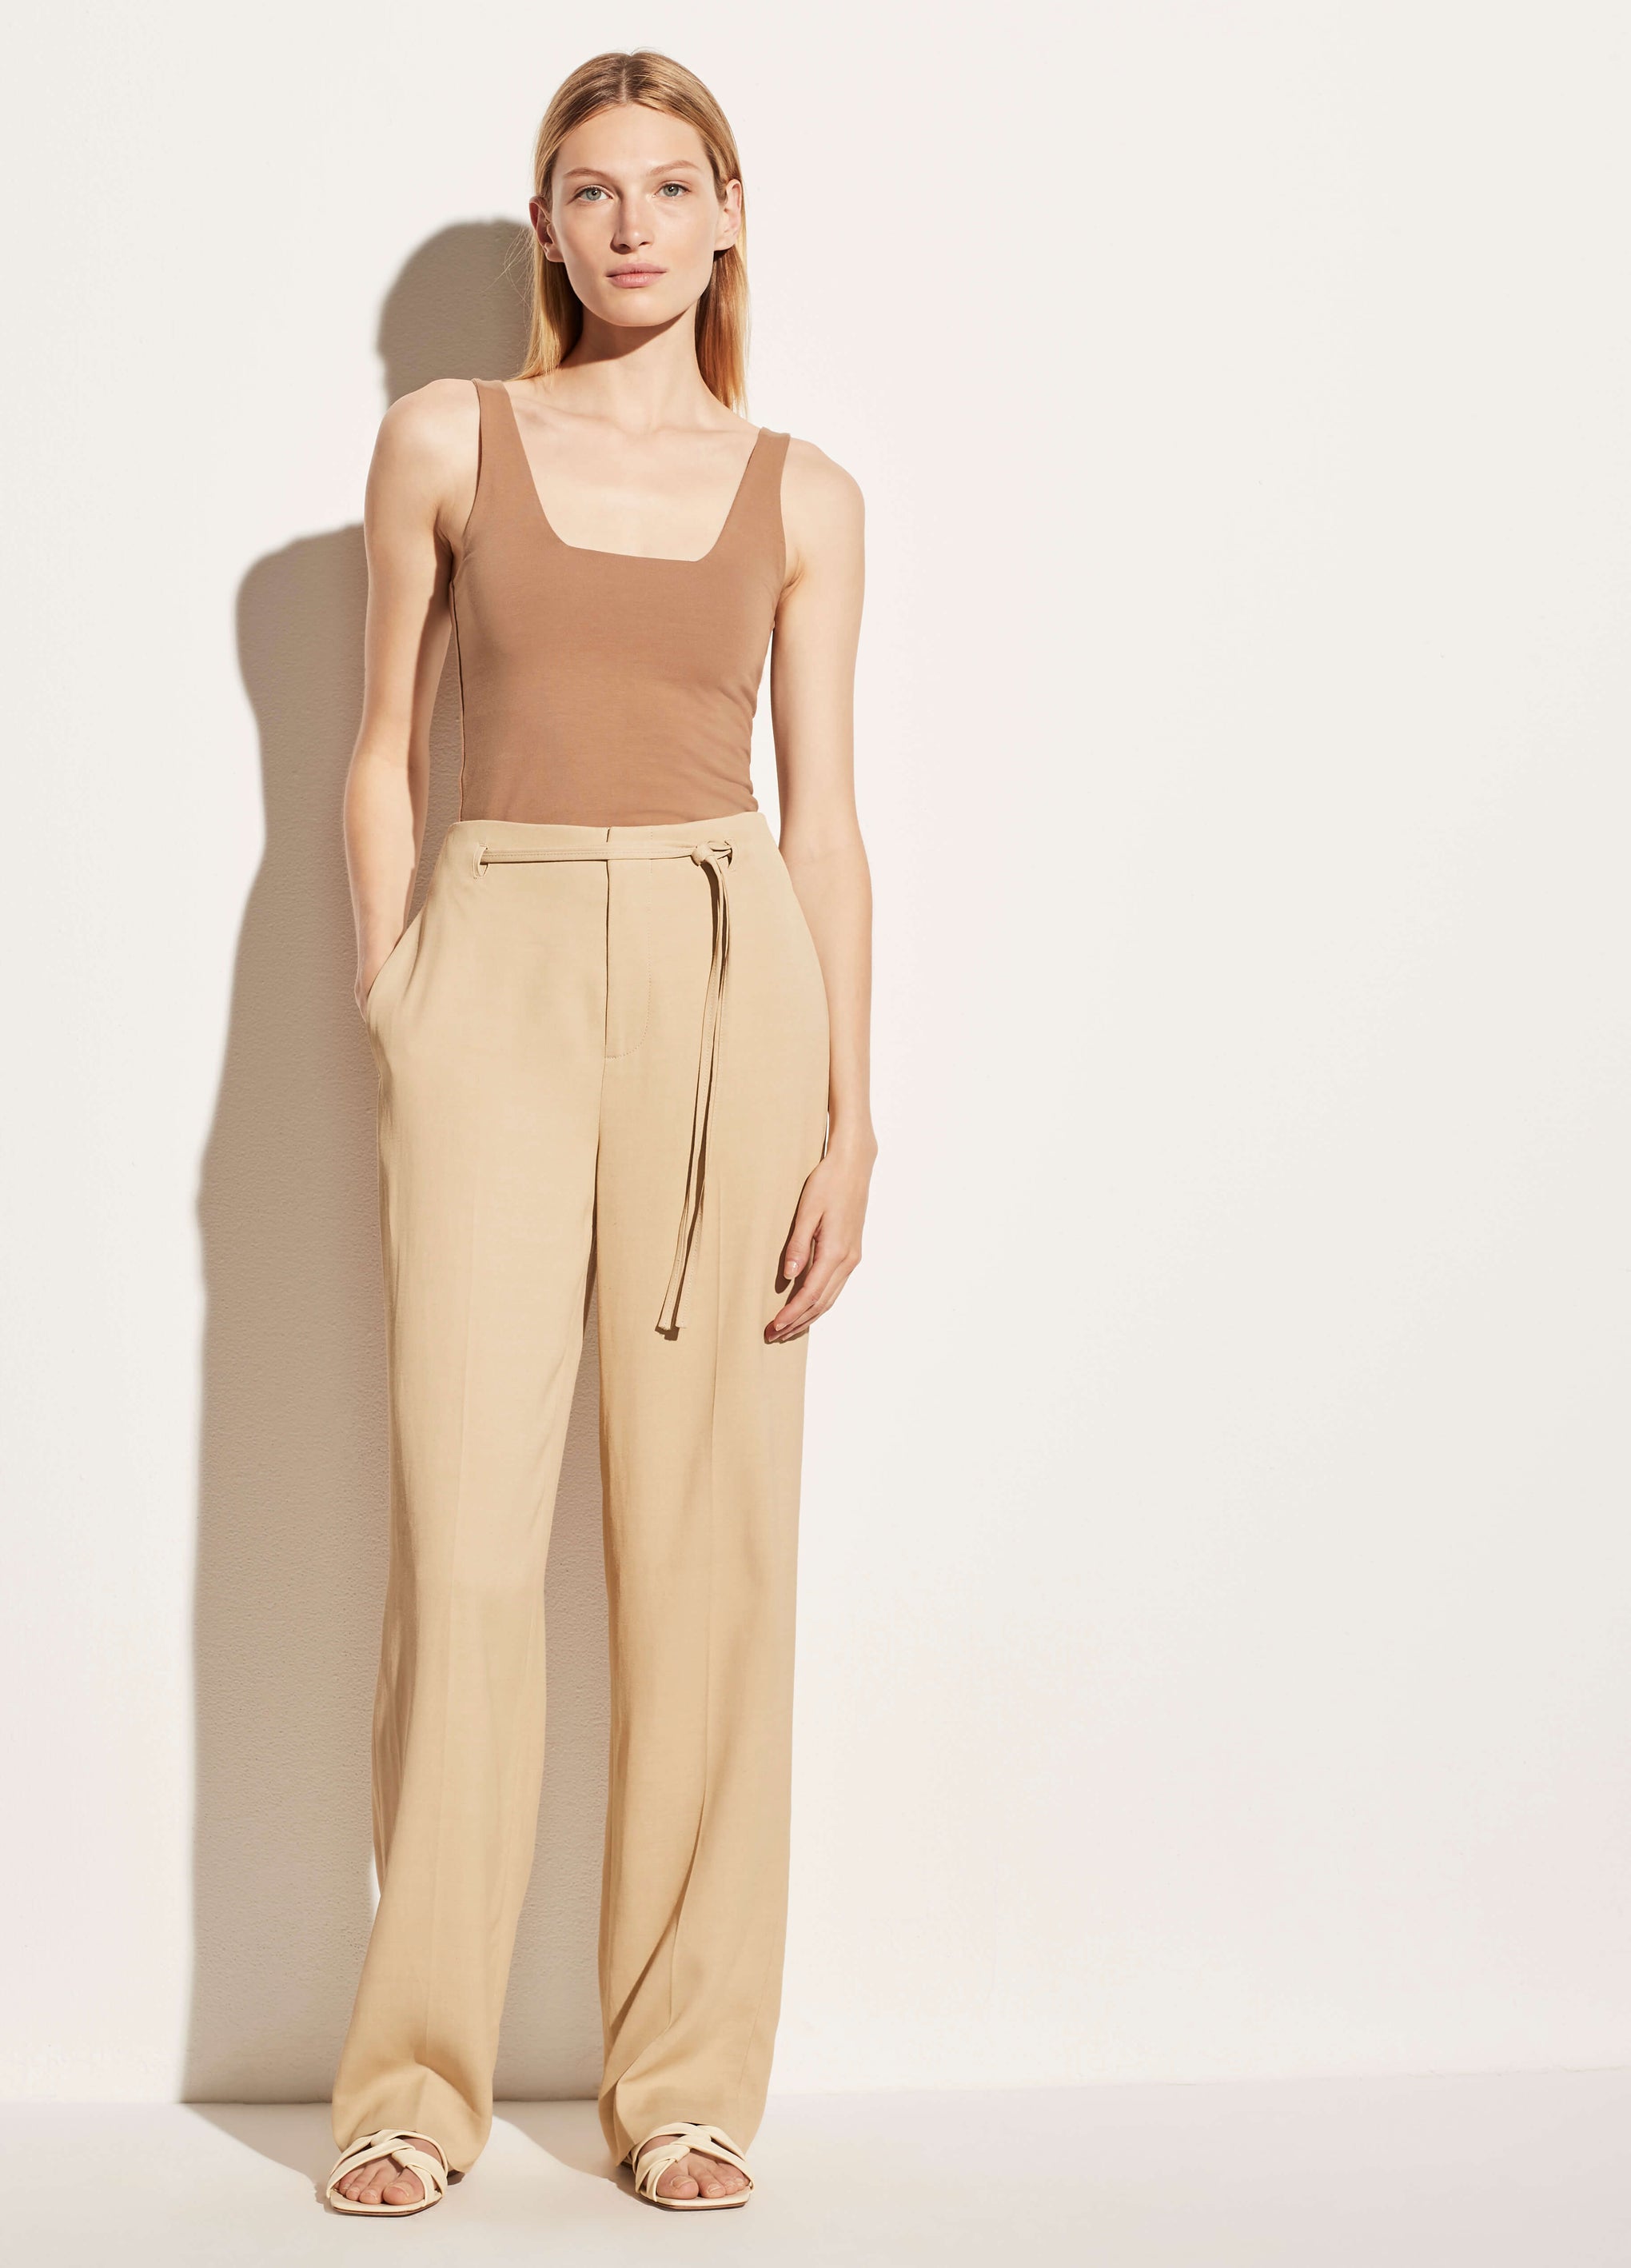 Vince High Waist Belted Pant in Beige from The New Trend